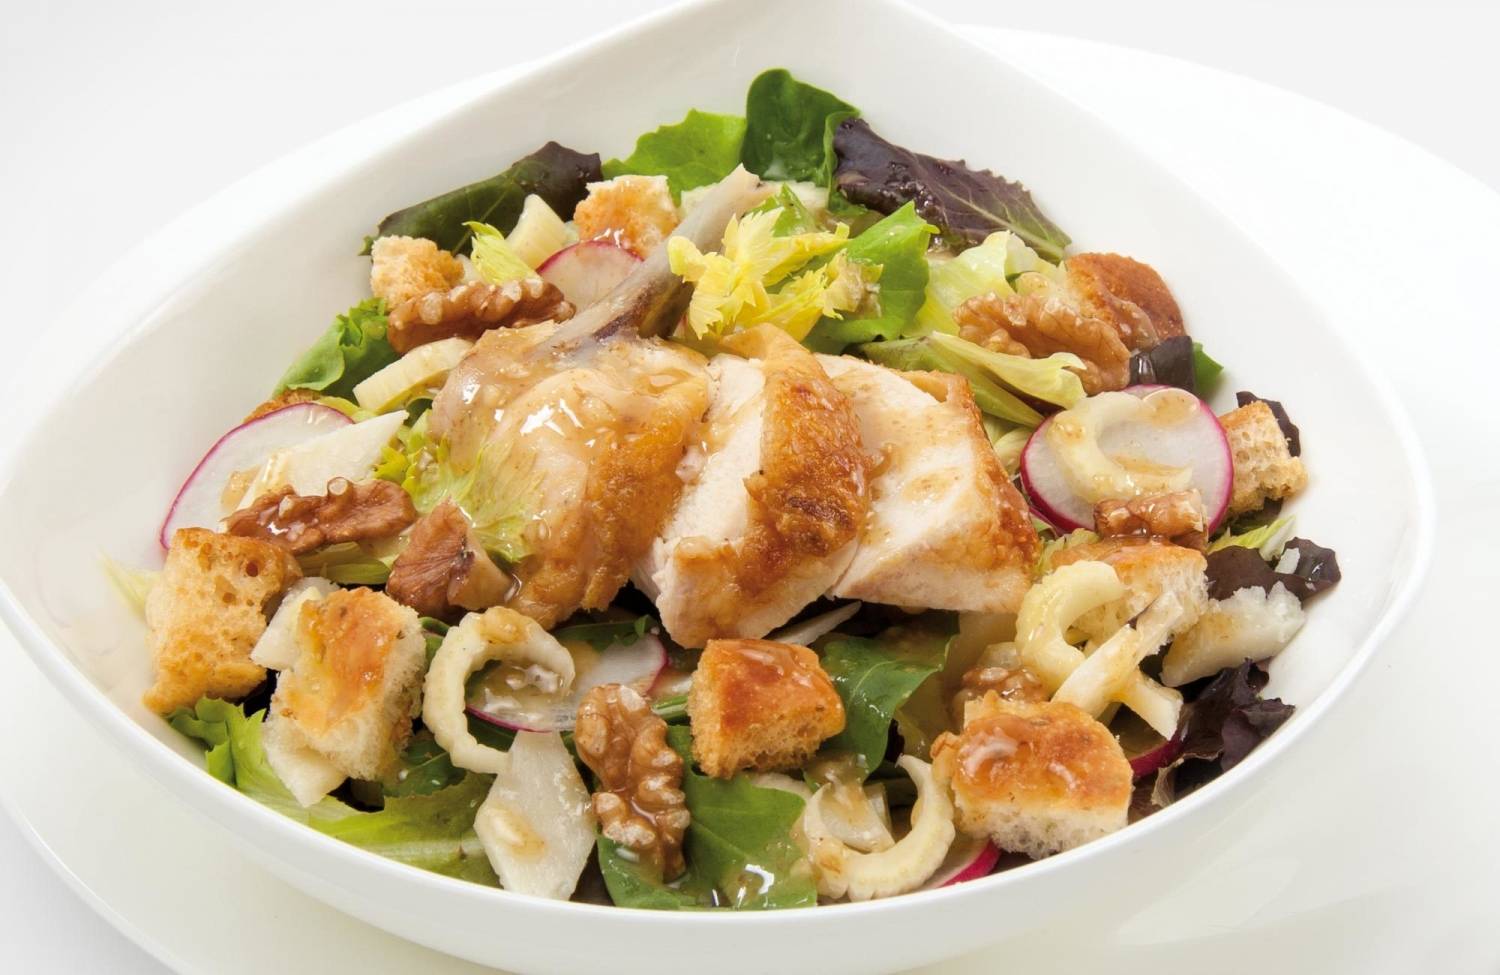 Chicken salad with croutons and walnuts cream